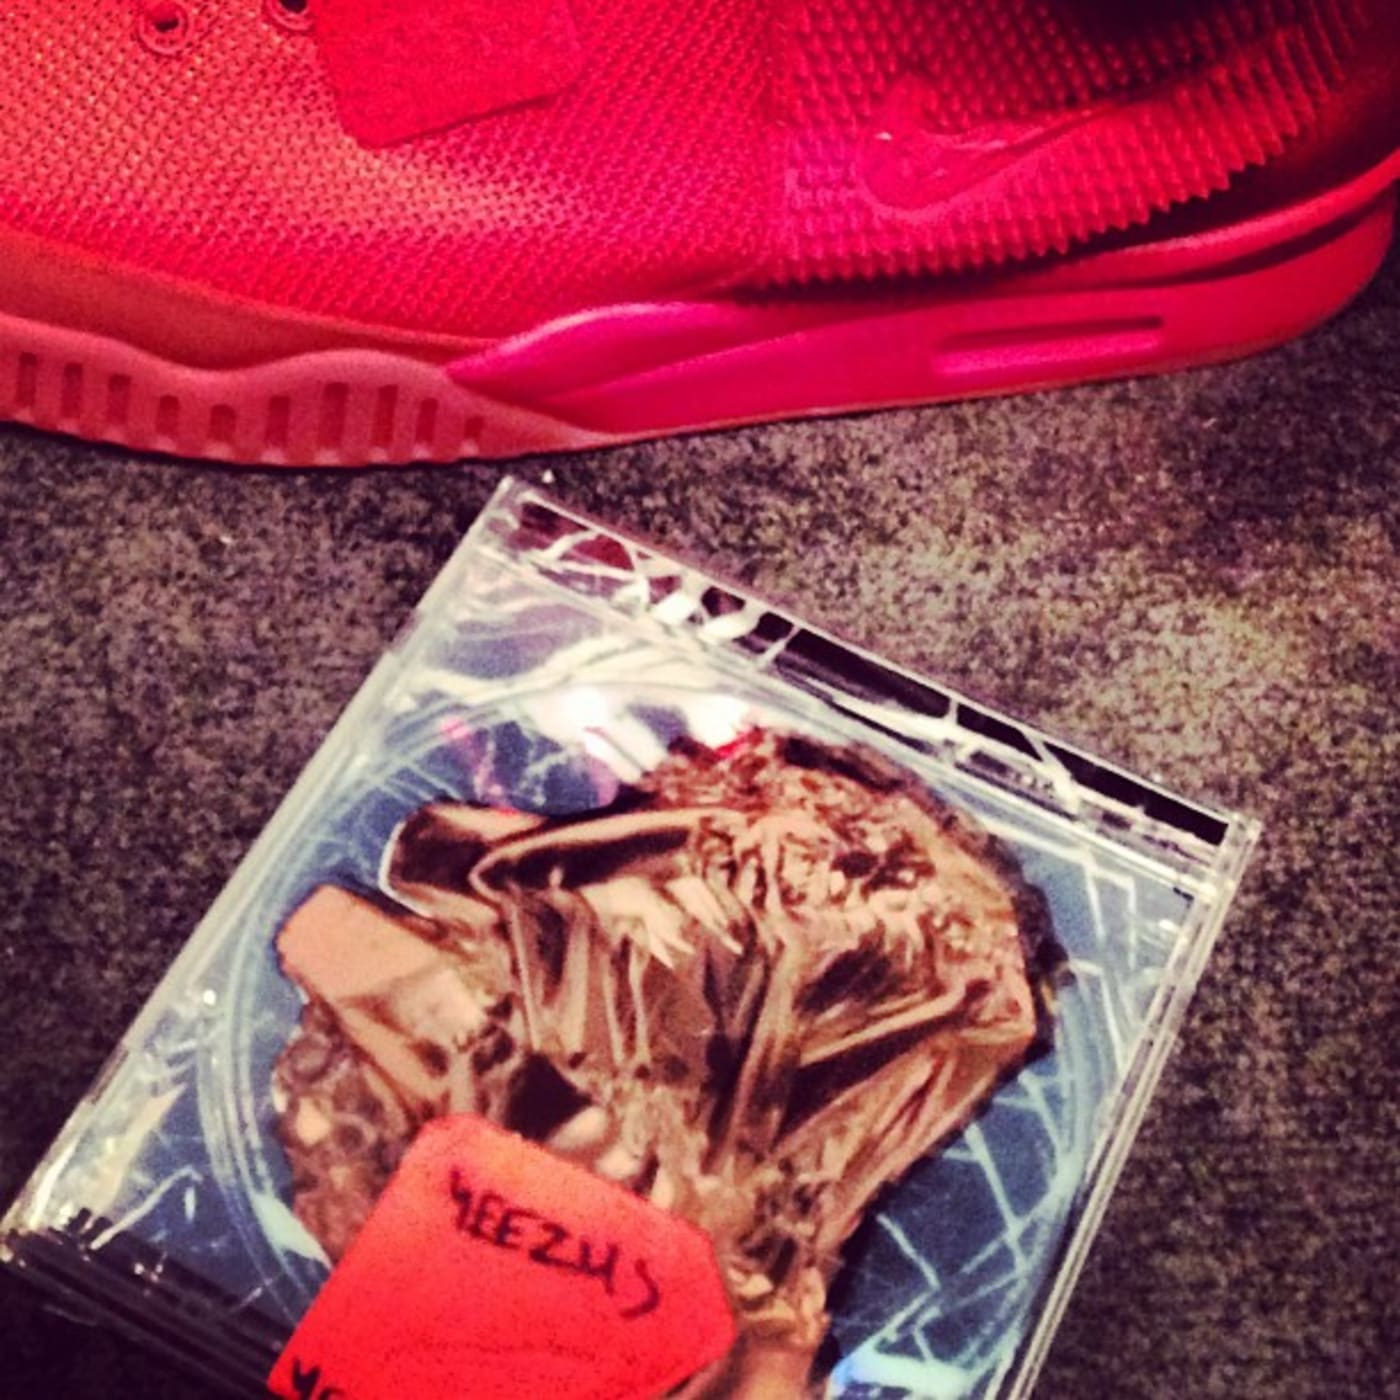 Collecting]: Yeezy Red October: The Watershed Moment of the Sneaker Game r/HobbyDrama